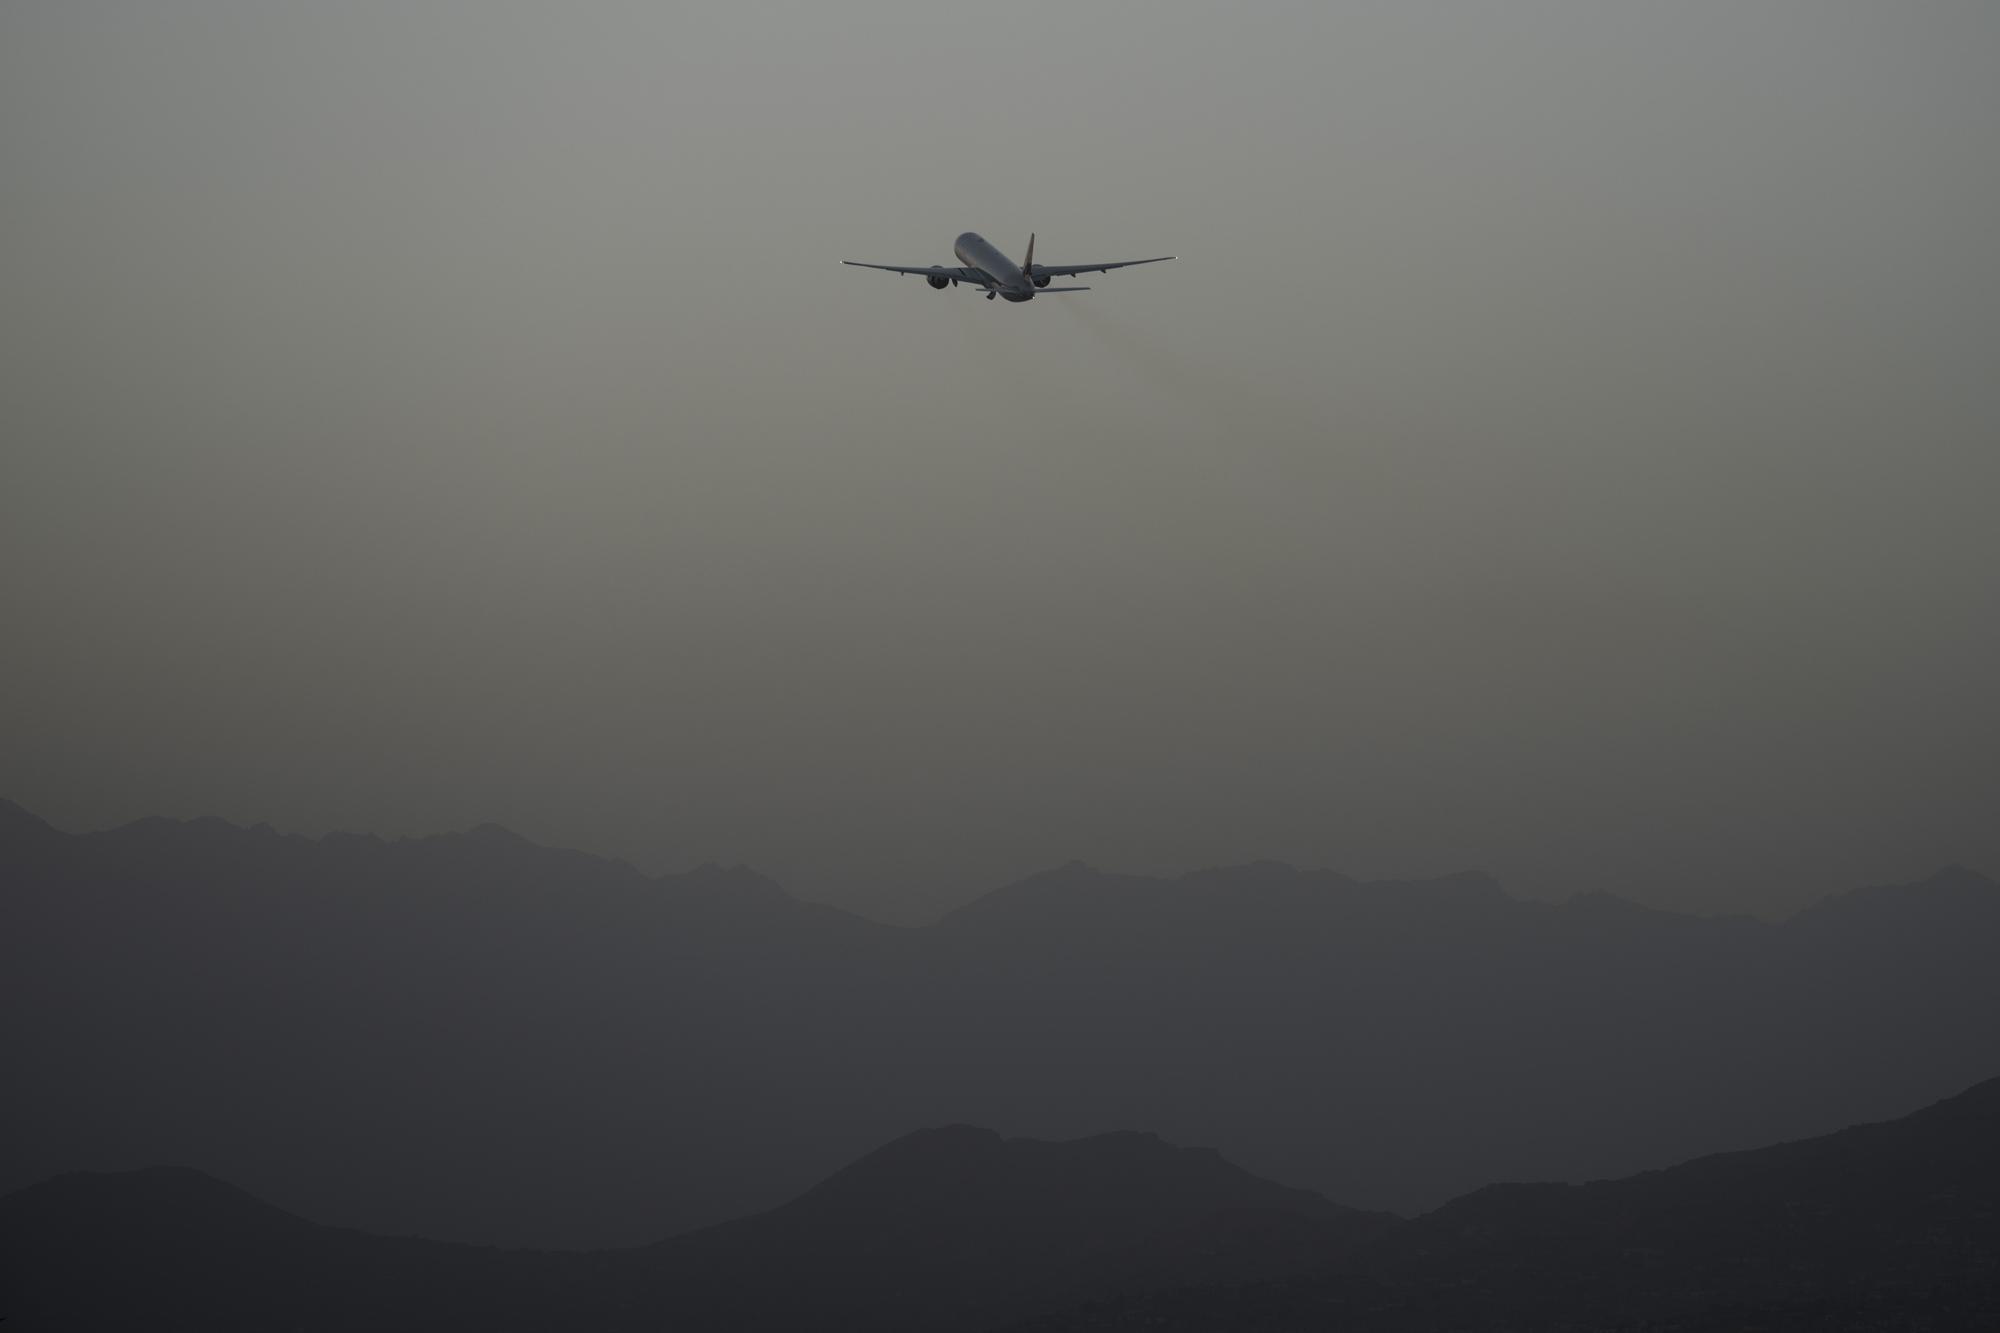 FILE - A Qatar Airways aircraft takes off with foreigners from the airport in Kabul, Afghanistan, Thursday, Sept. 9, 2021, as some 200 foreigners, including Americans, flew out of the country, the first such large-scale departure since U.S and foreign forces concluded their frantic withdrawal at the end of the previous month. (AP Photo/Bernat Armangue, File)